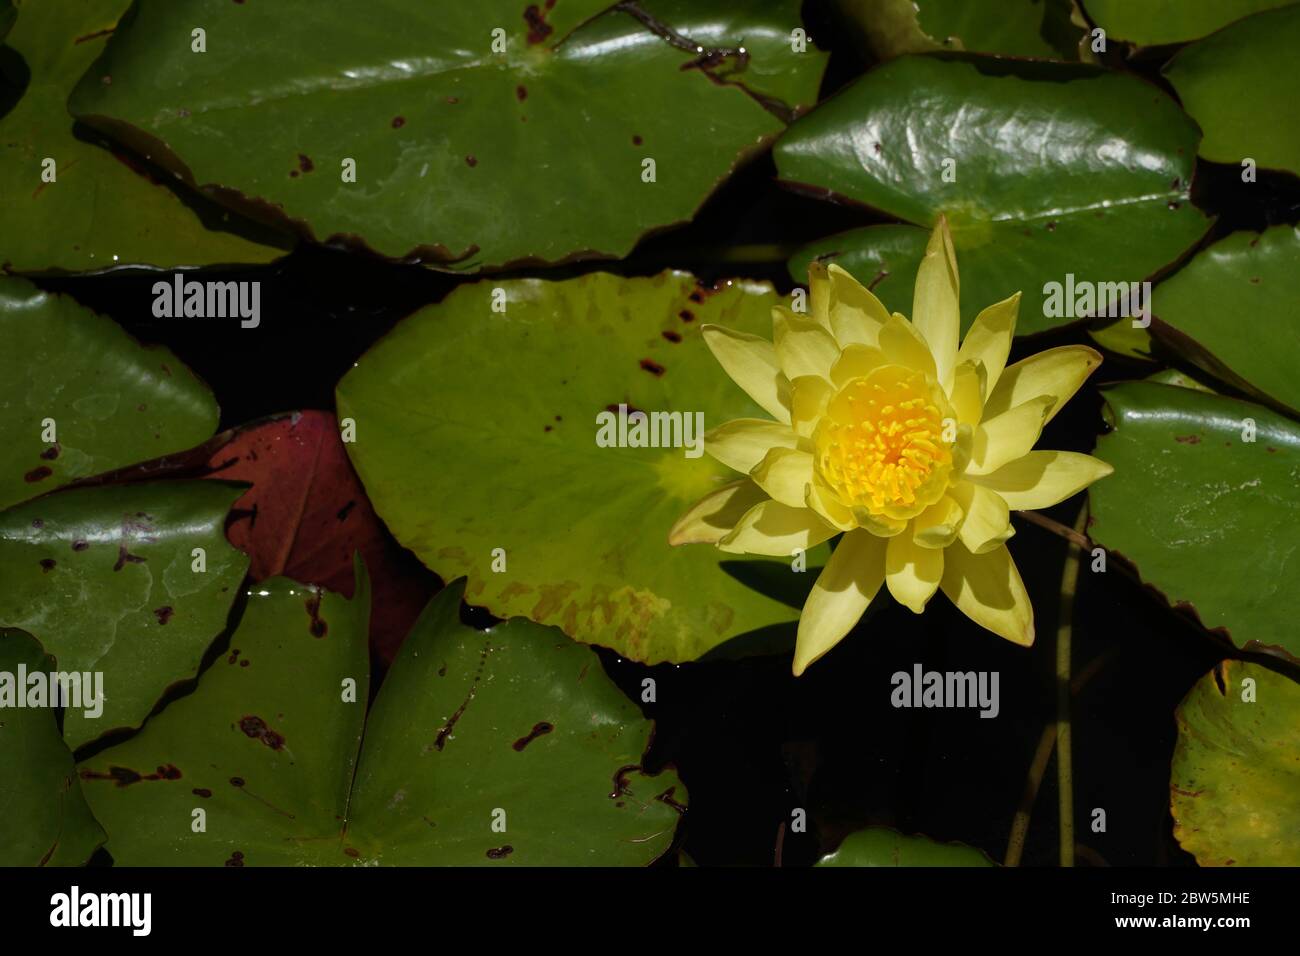 One beautiful bright yellow water lily flower against a mass of floating green water lily pads on dark water, with a pink pad underside showing. Stock Photo